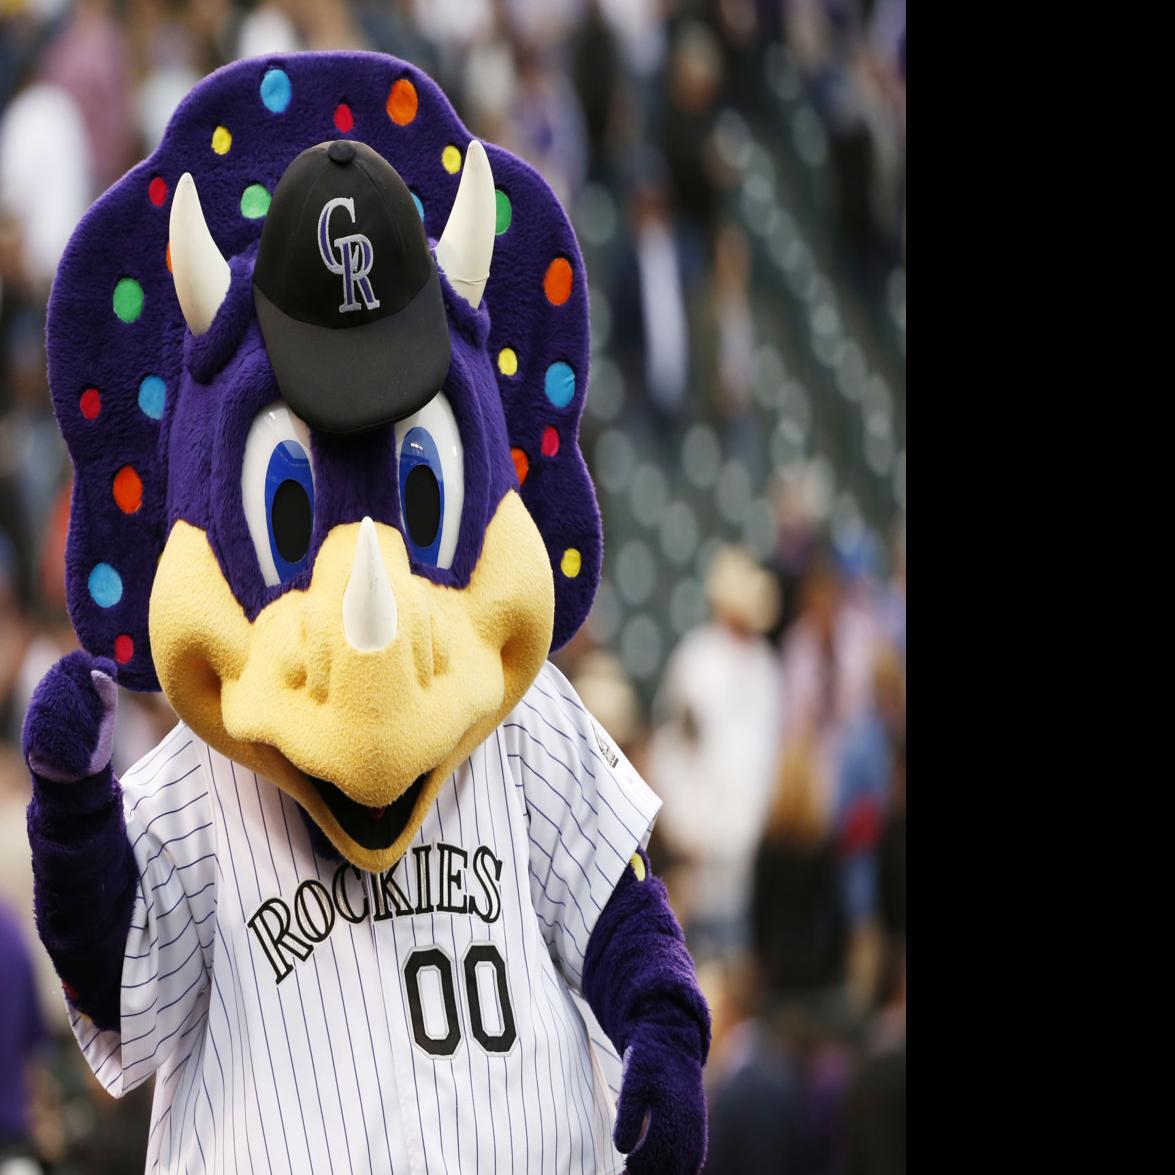 Blame Dinger: Rockies conclude fan was shouting name of mascot